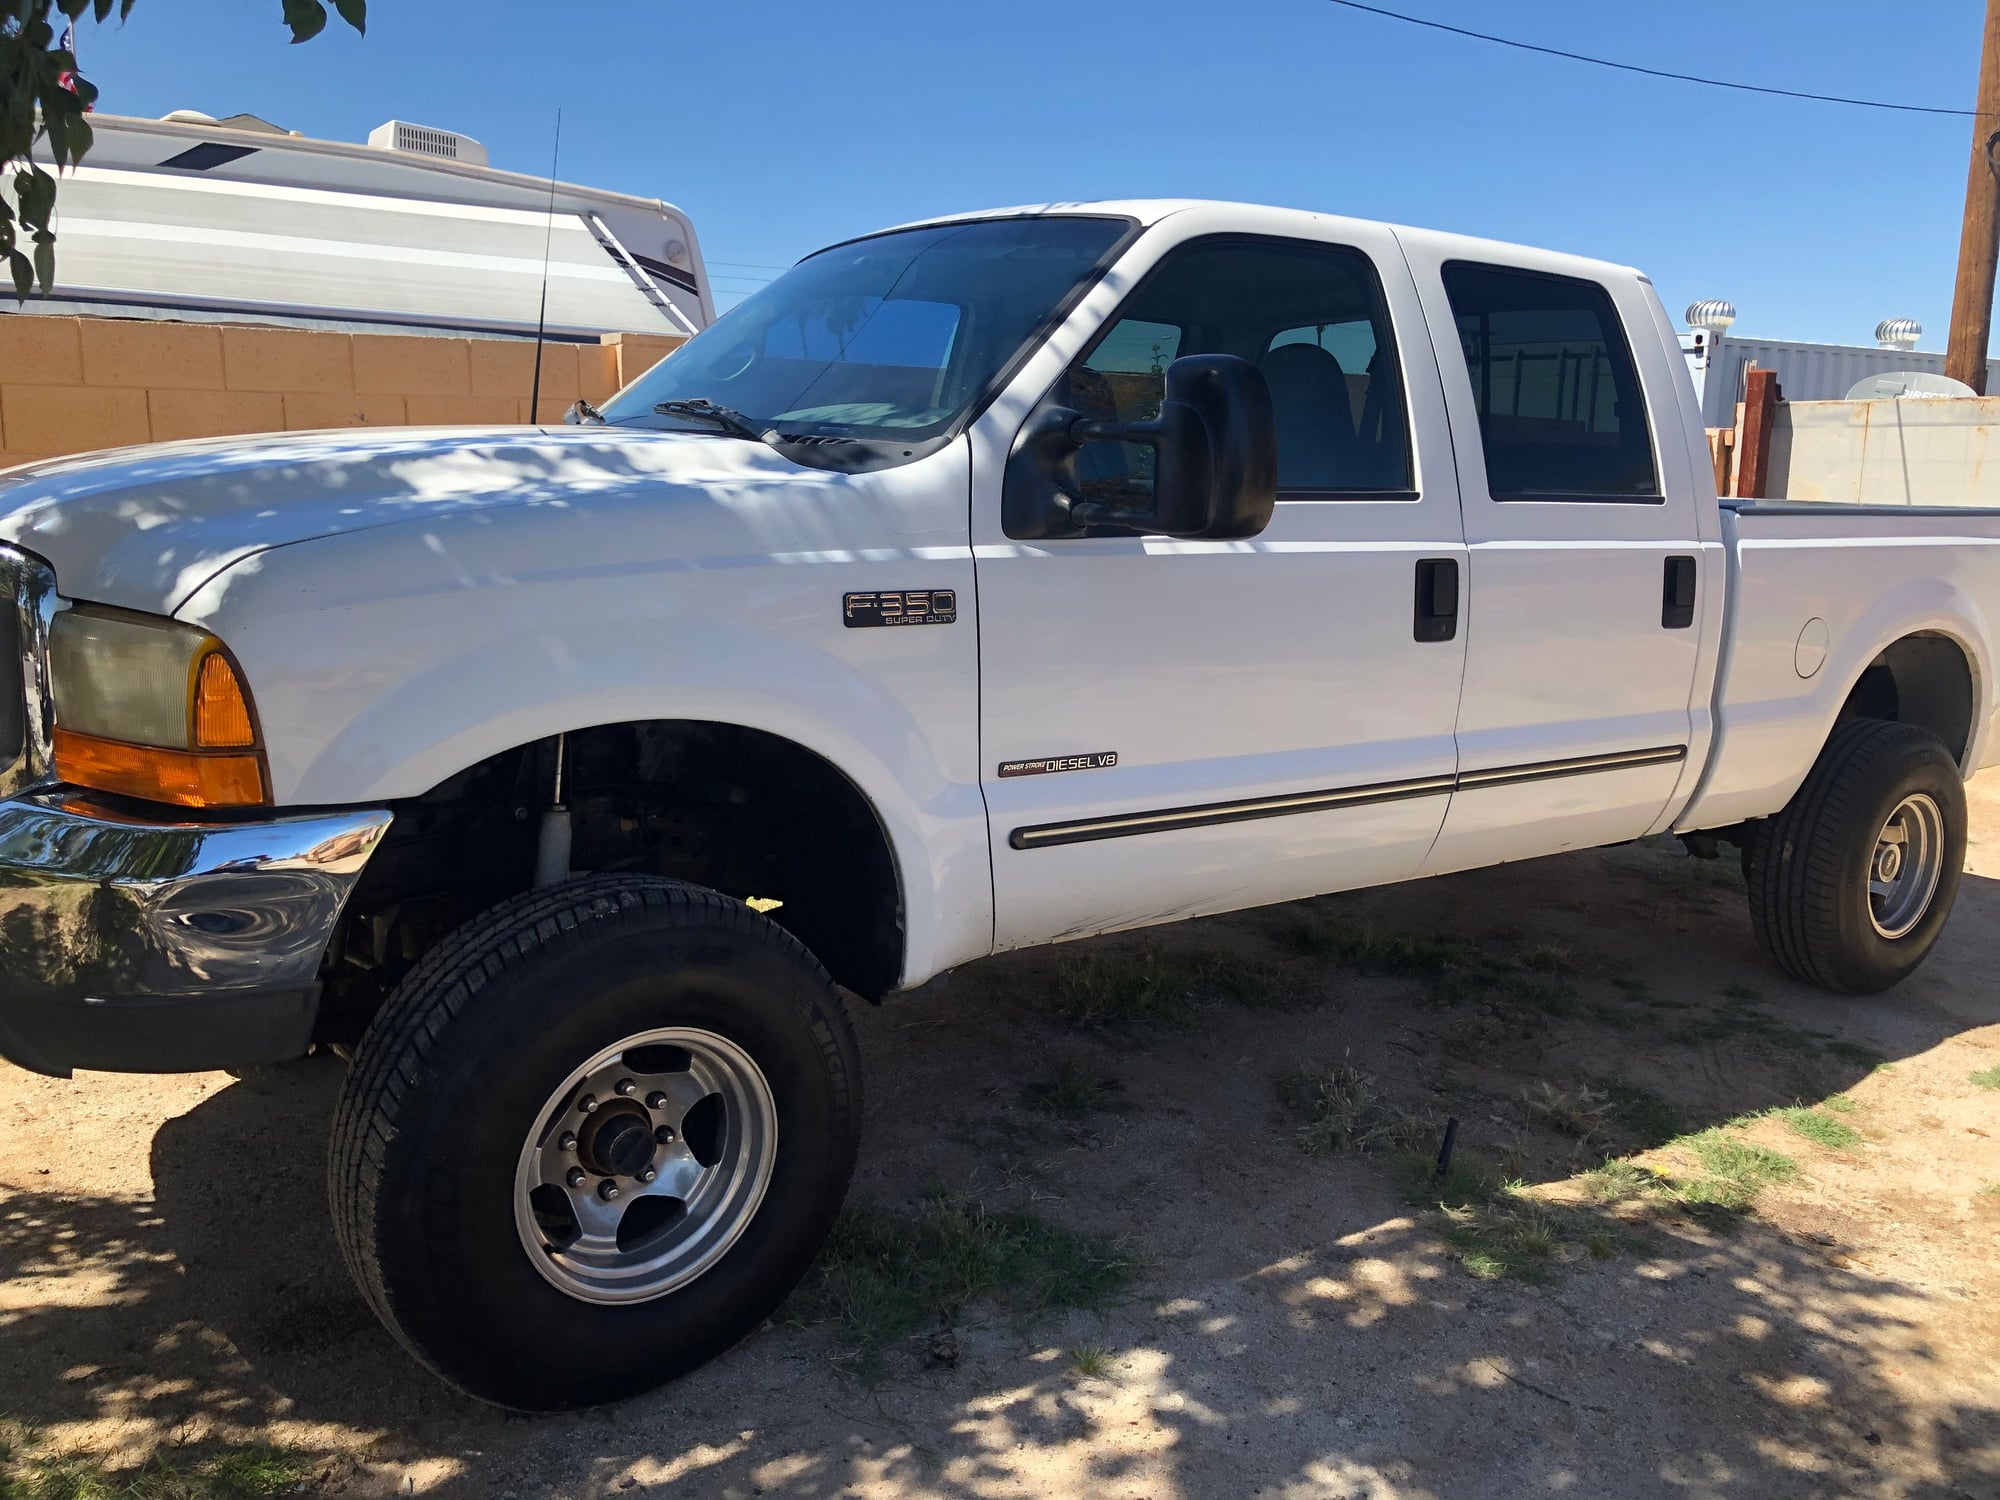 1999 Ford F-350 Super Duty - 1999 ford f350 - Used - VIN F2343434343435353 - 307,000 Miles - 8 cyl - 4WD - Automatic - Truck - White - China